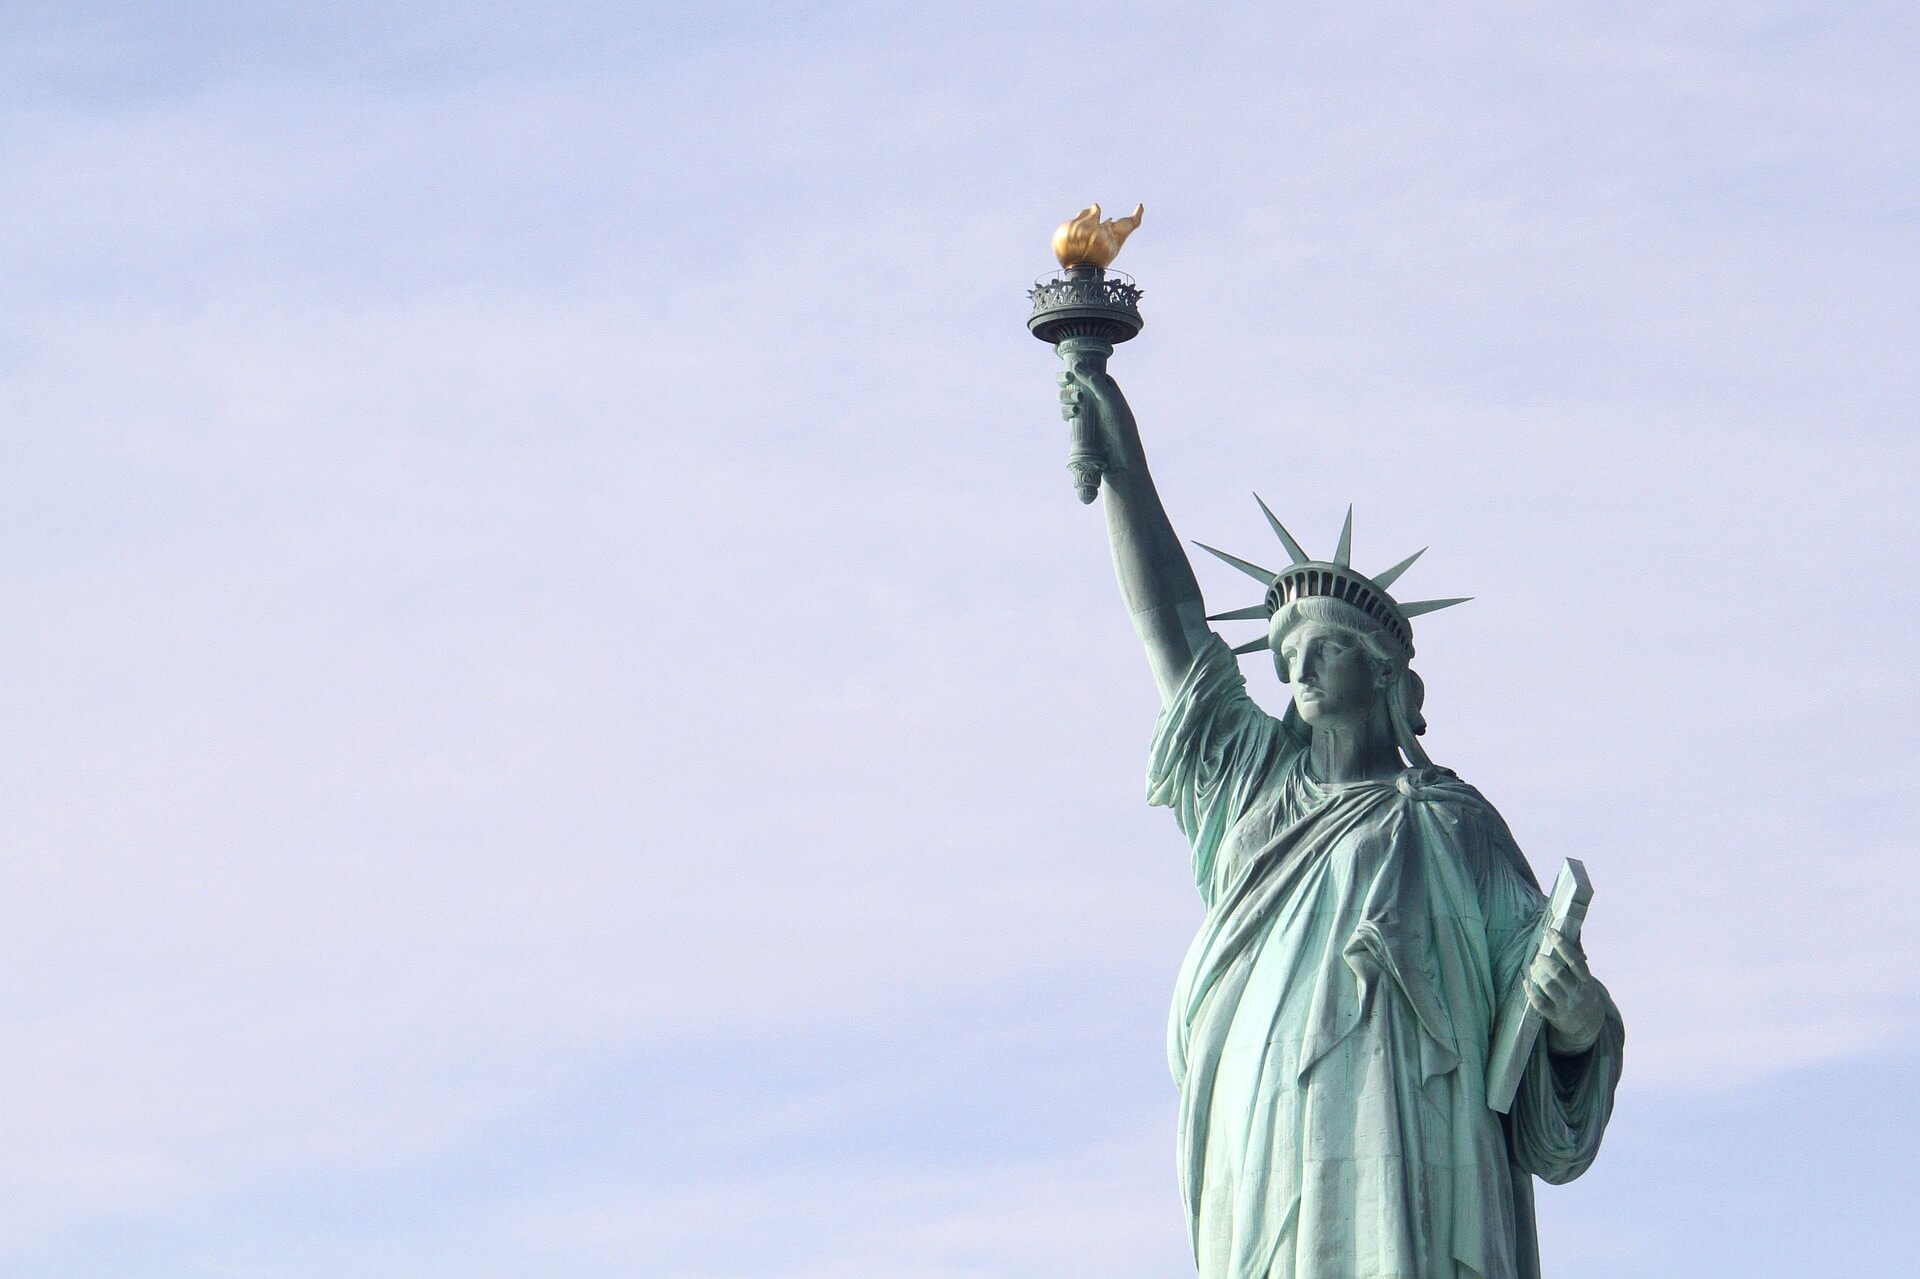 Photograph of the Statue of Liberty, which has a famous history of welcoming immigrants to the United States